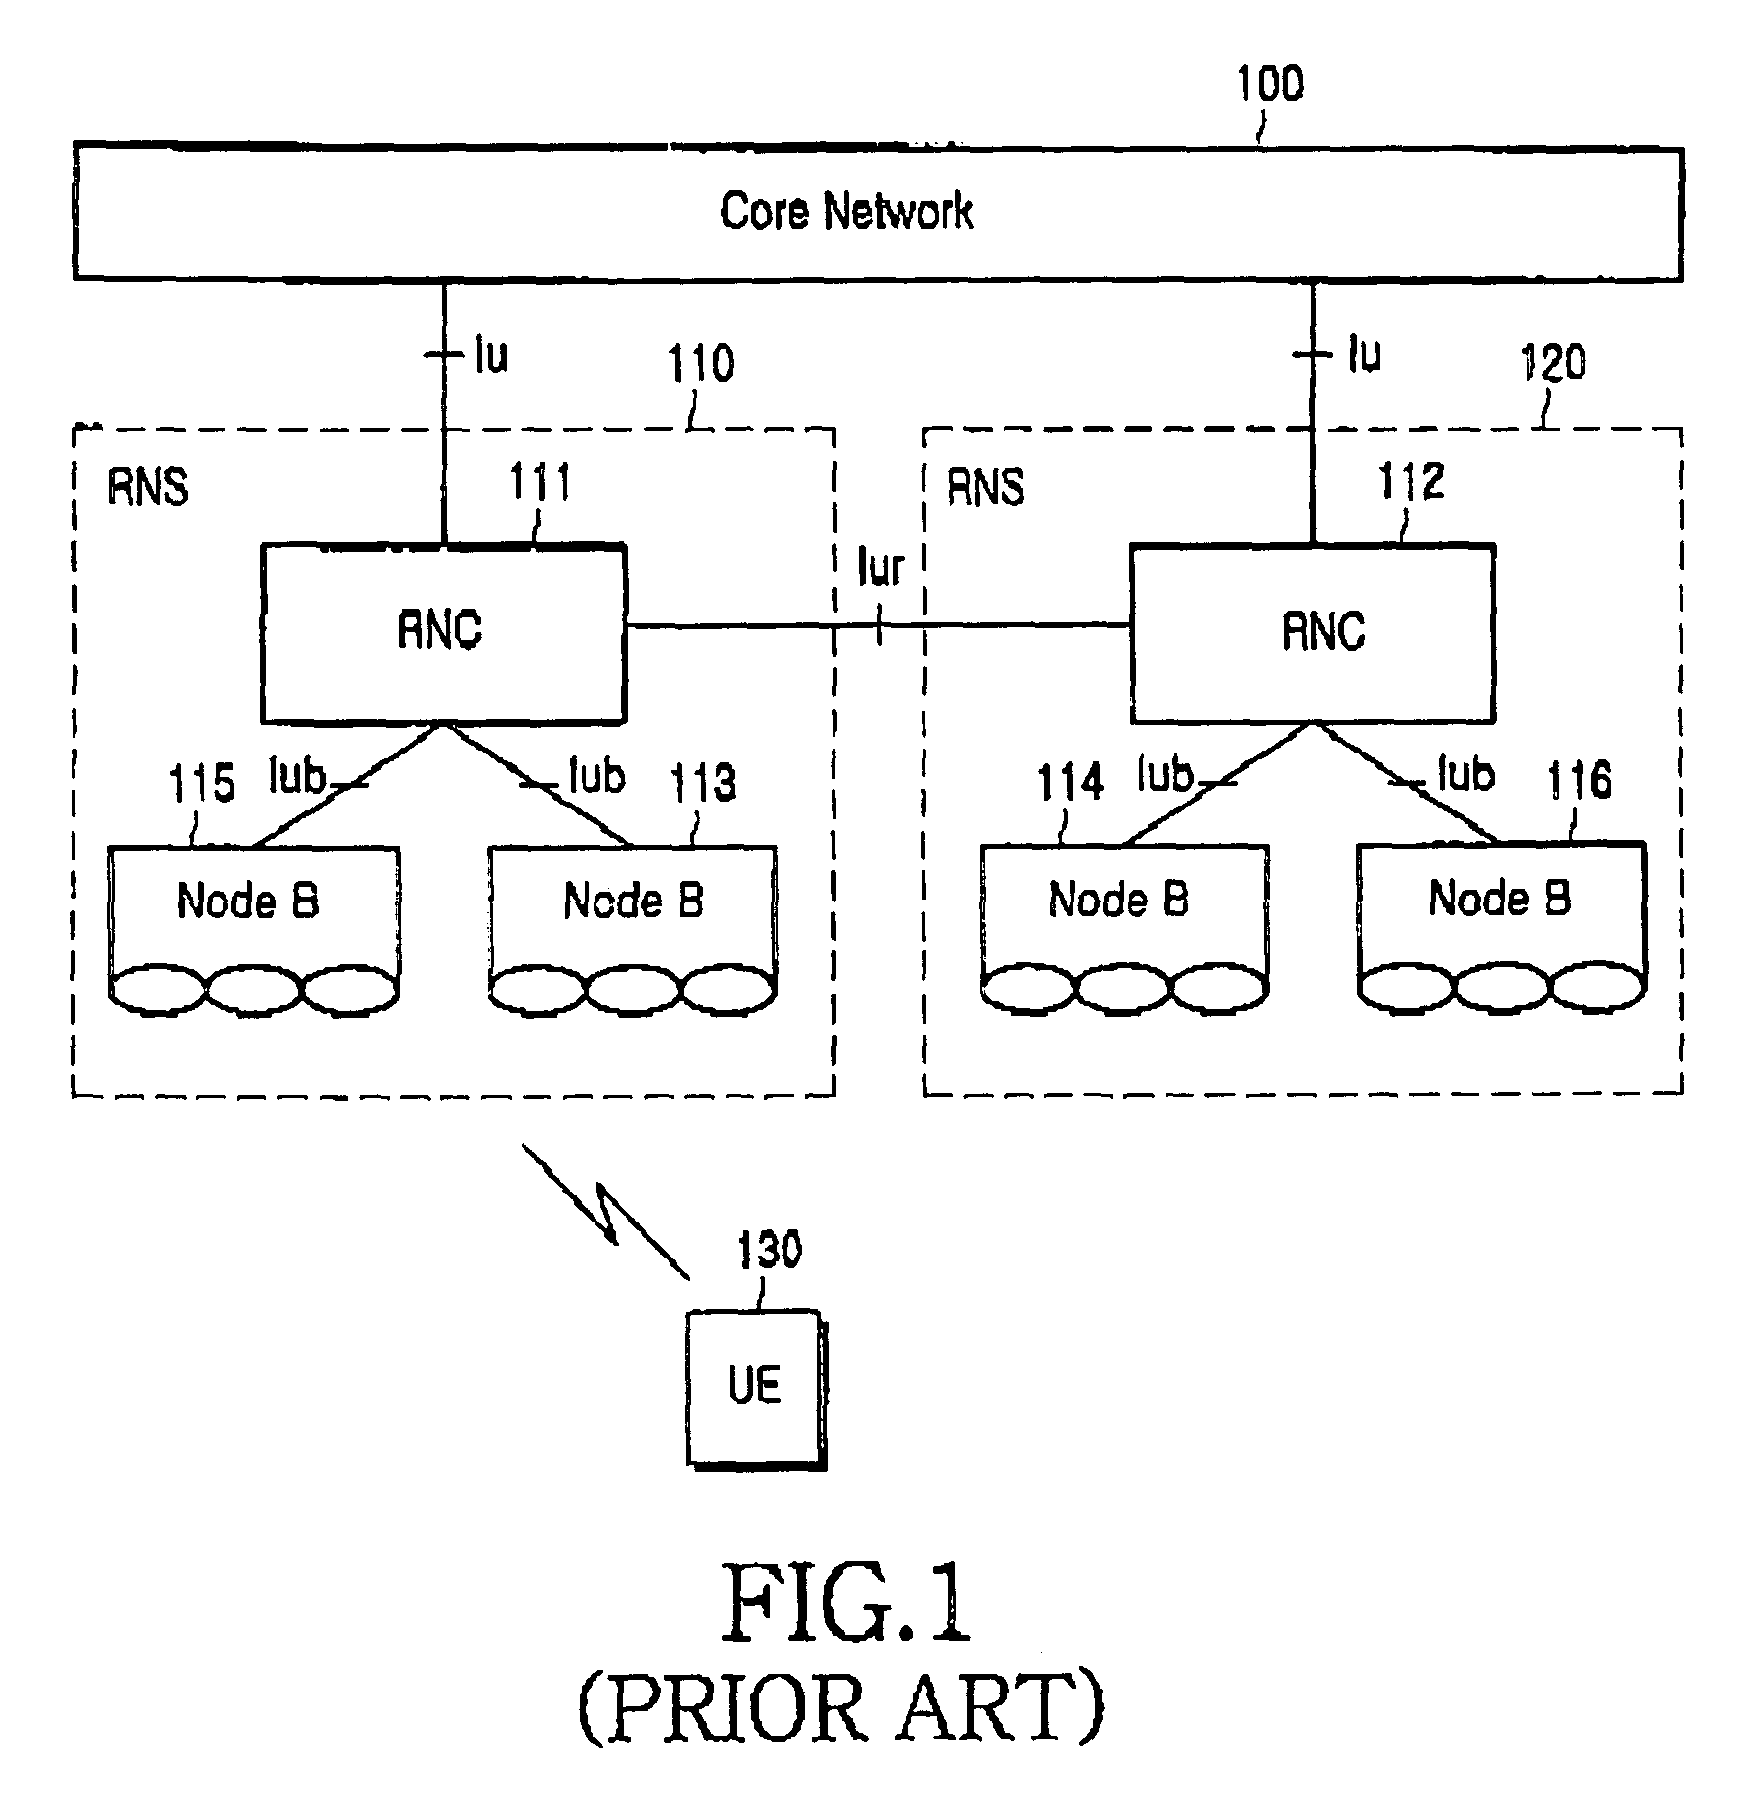 Apparatus and method for transmitting CQI information in a CDMA communication system employing an HSDPA scheme